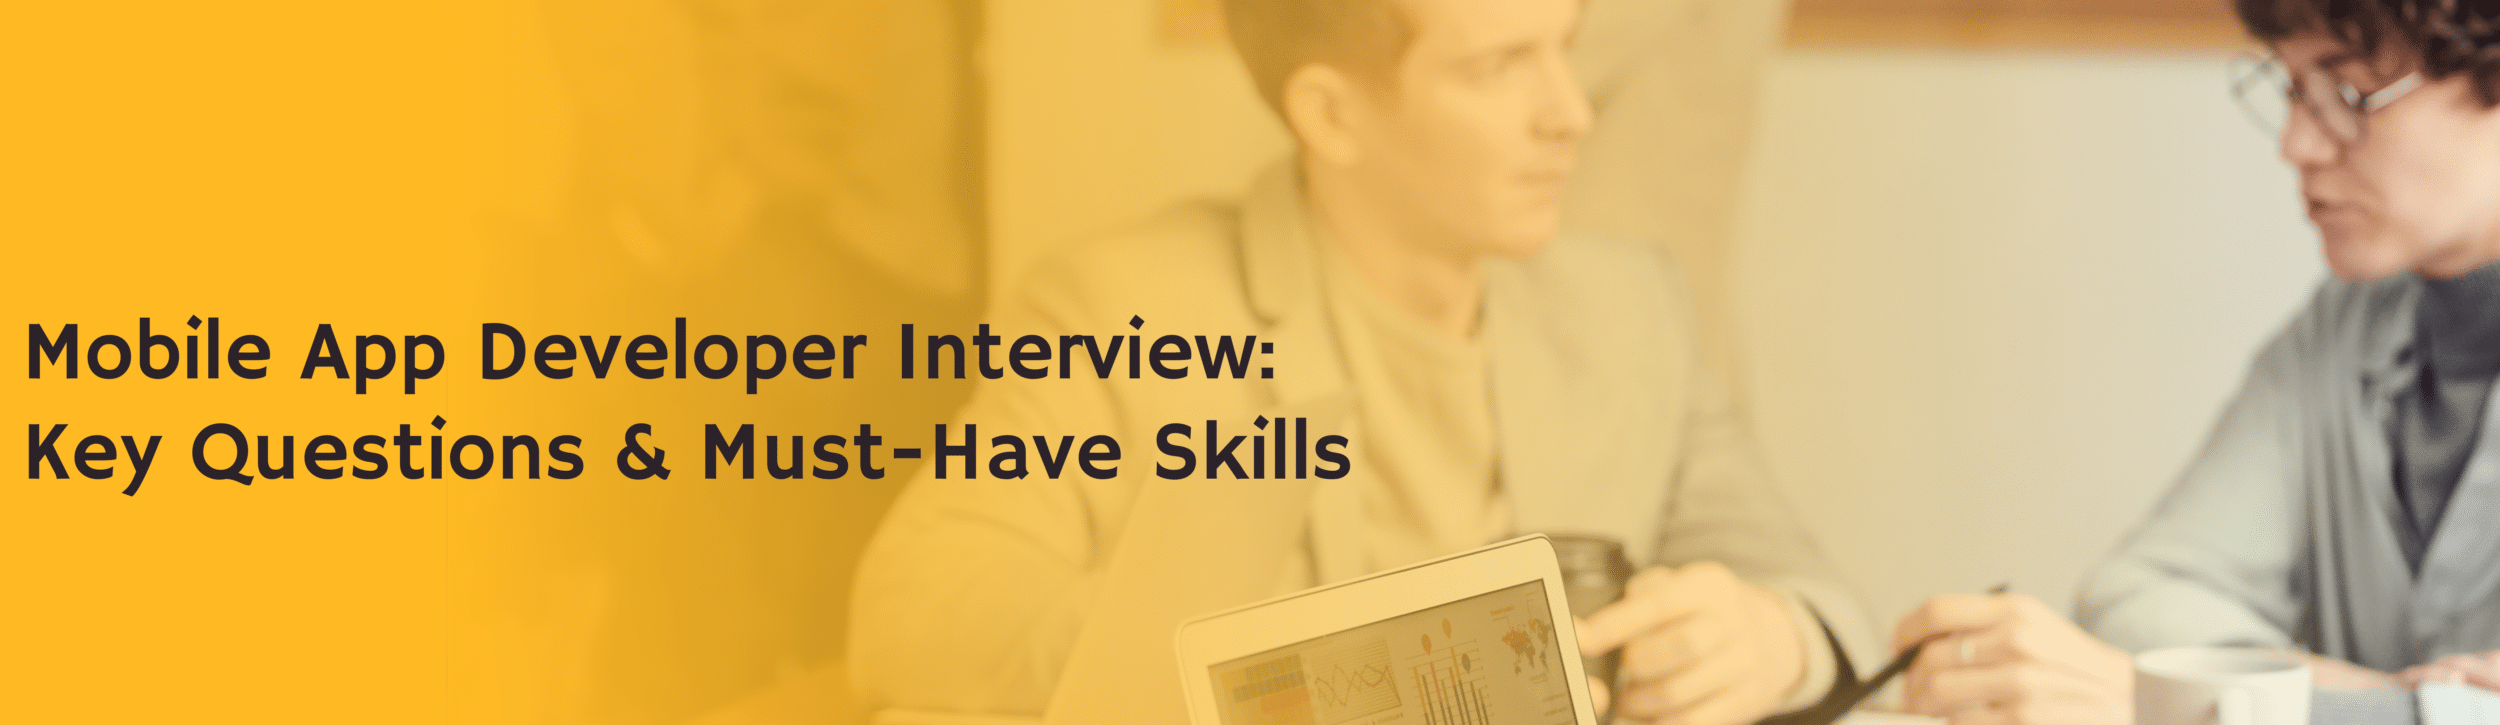 Mobile App Developer Interview: Key Questions & Must-Have Skills